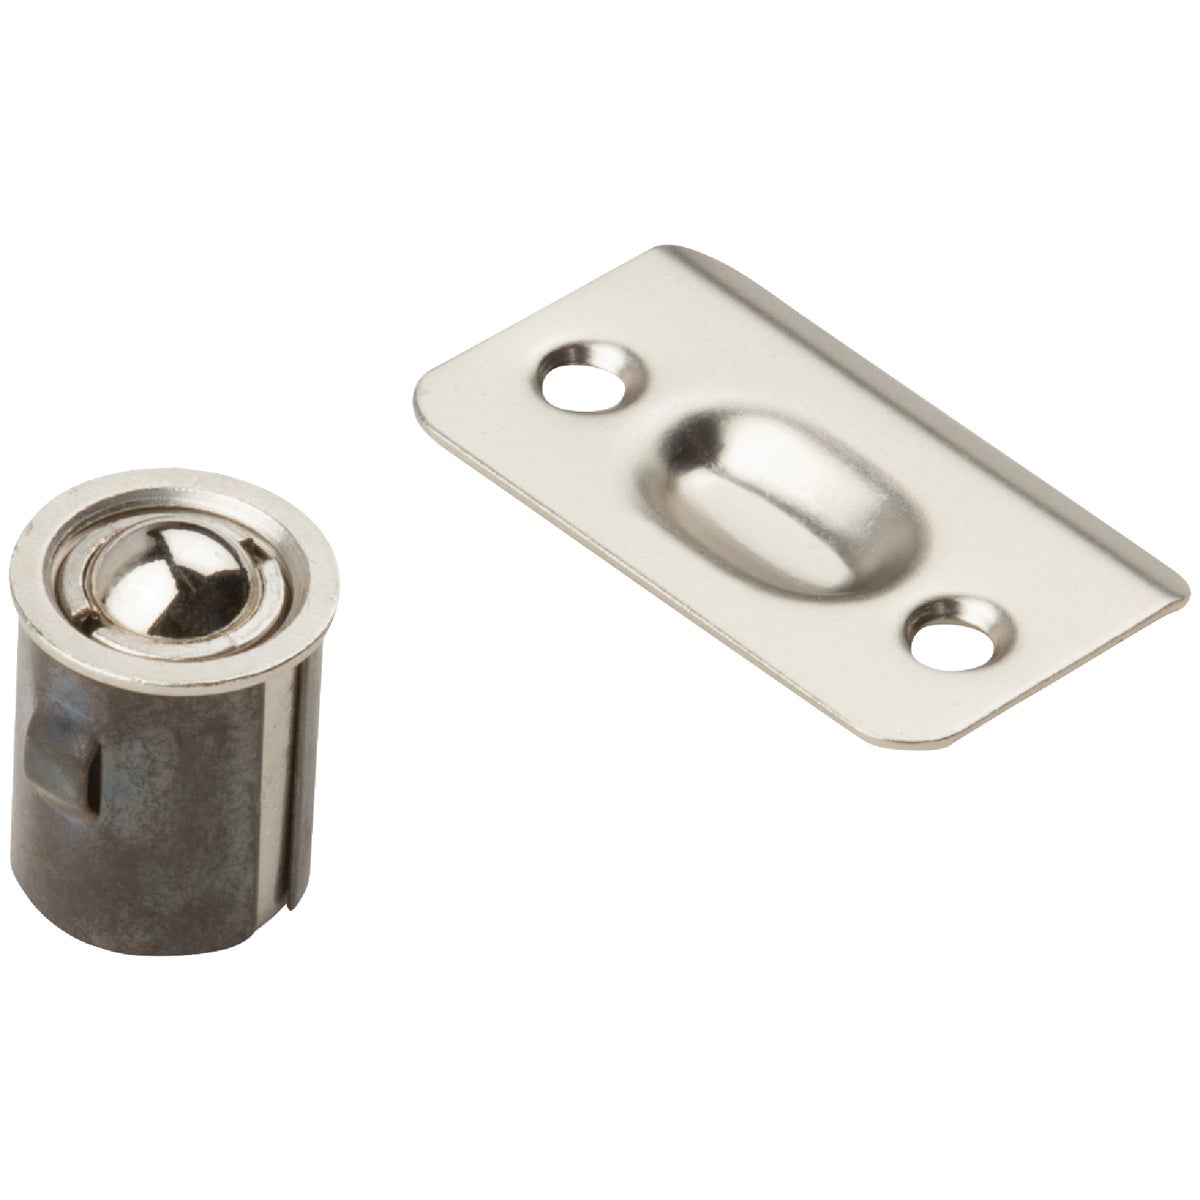 National 1440 Satin Nickel Drive-In Ball Catch